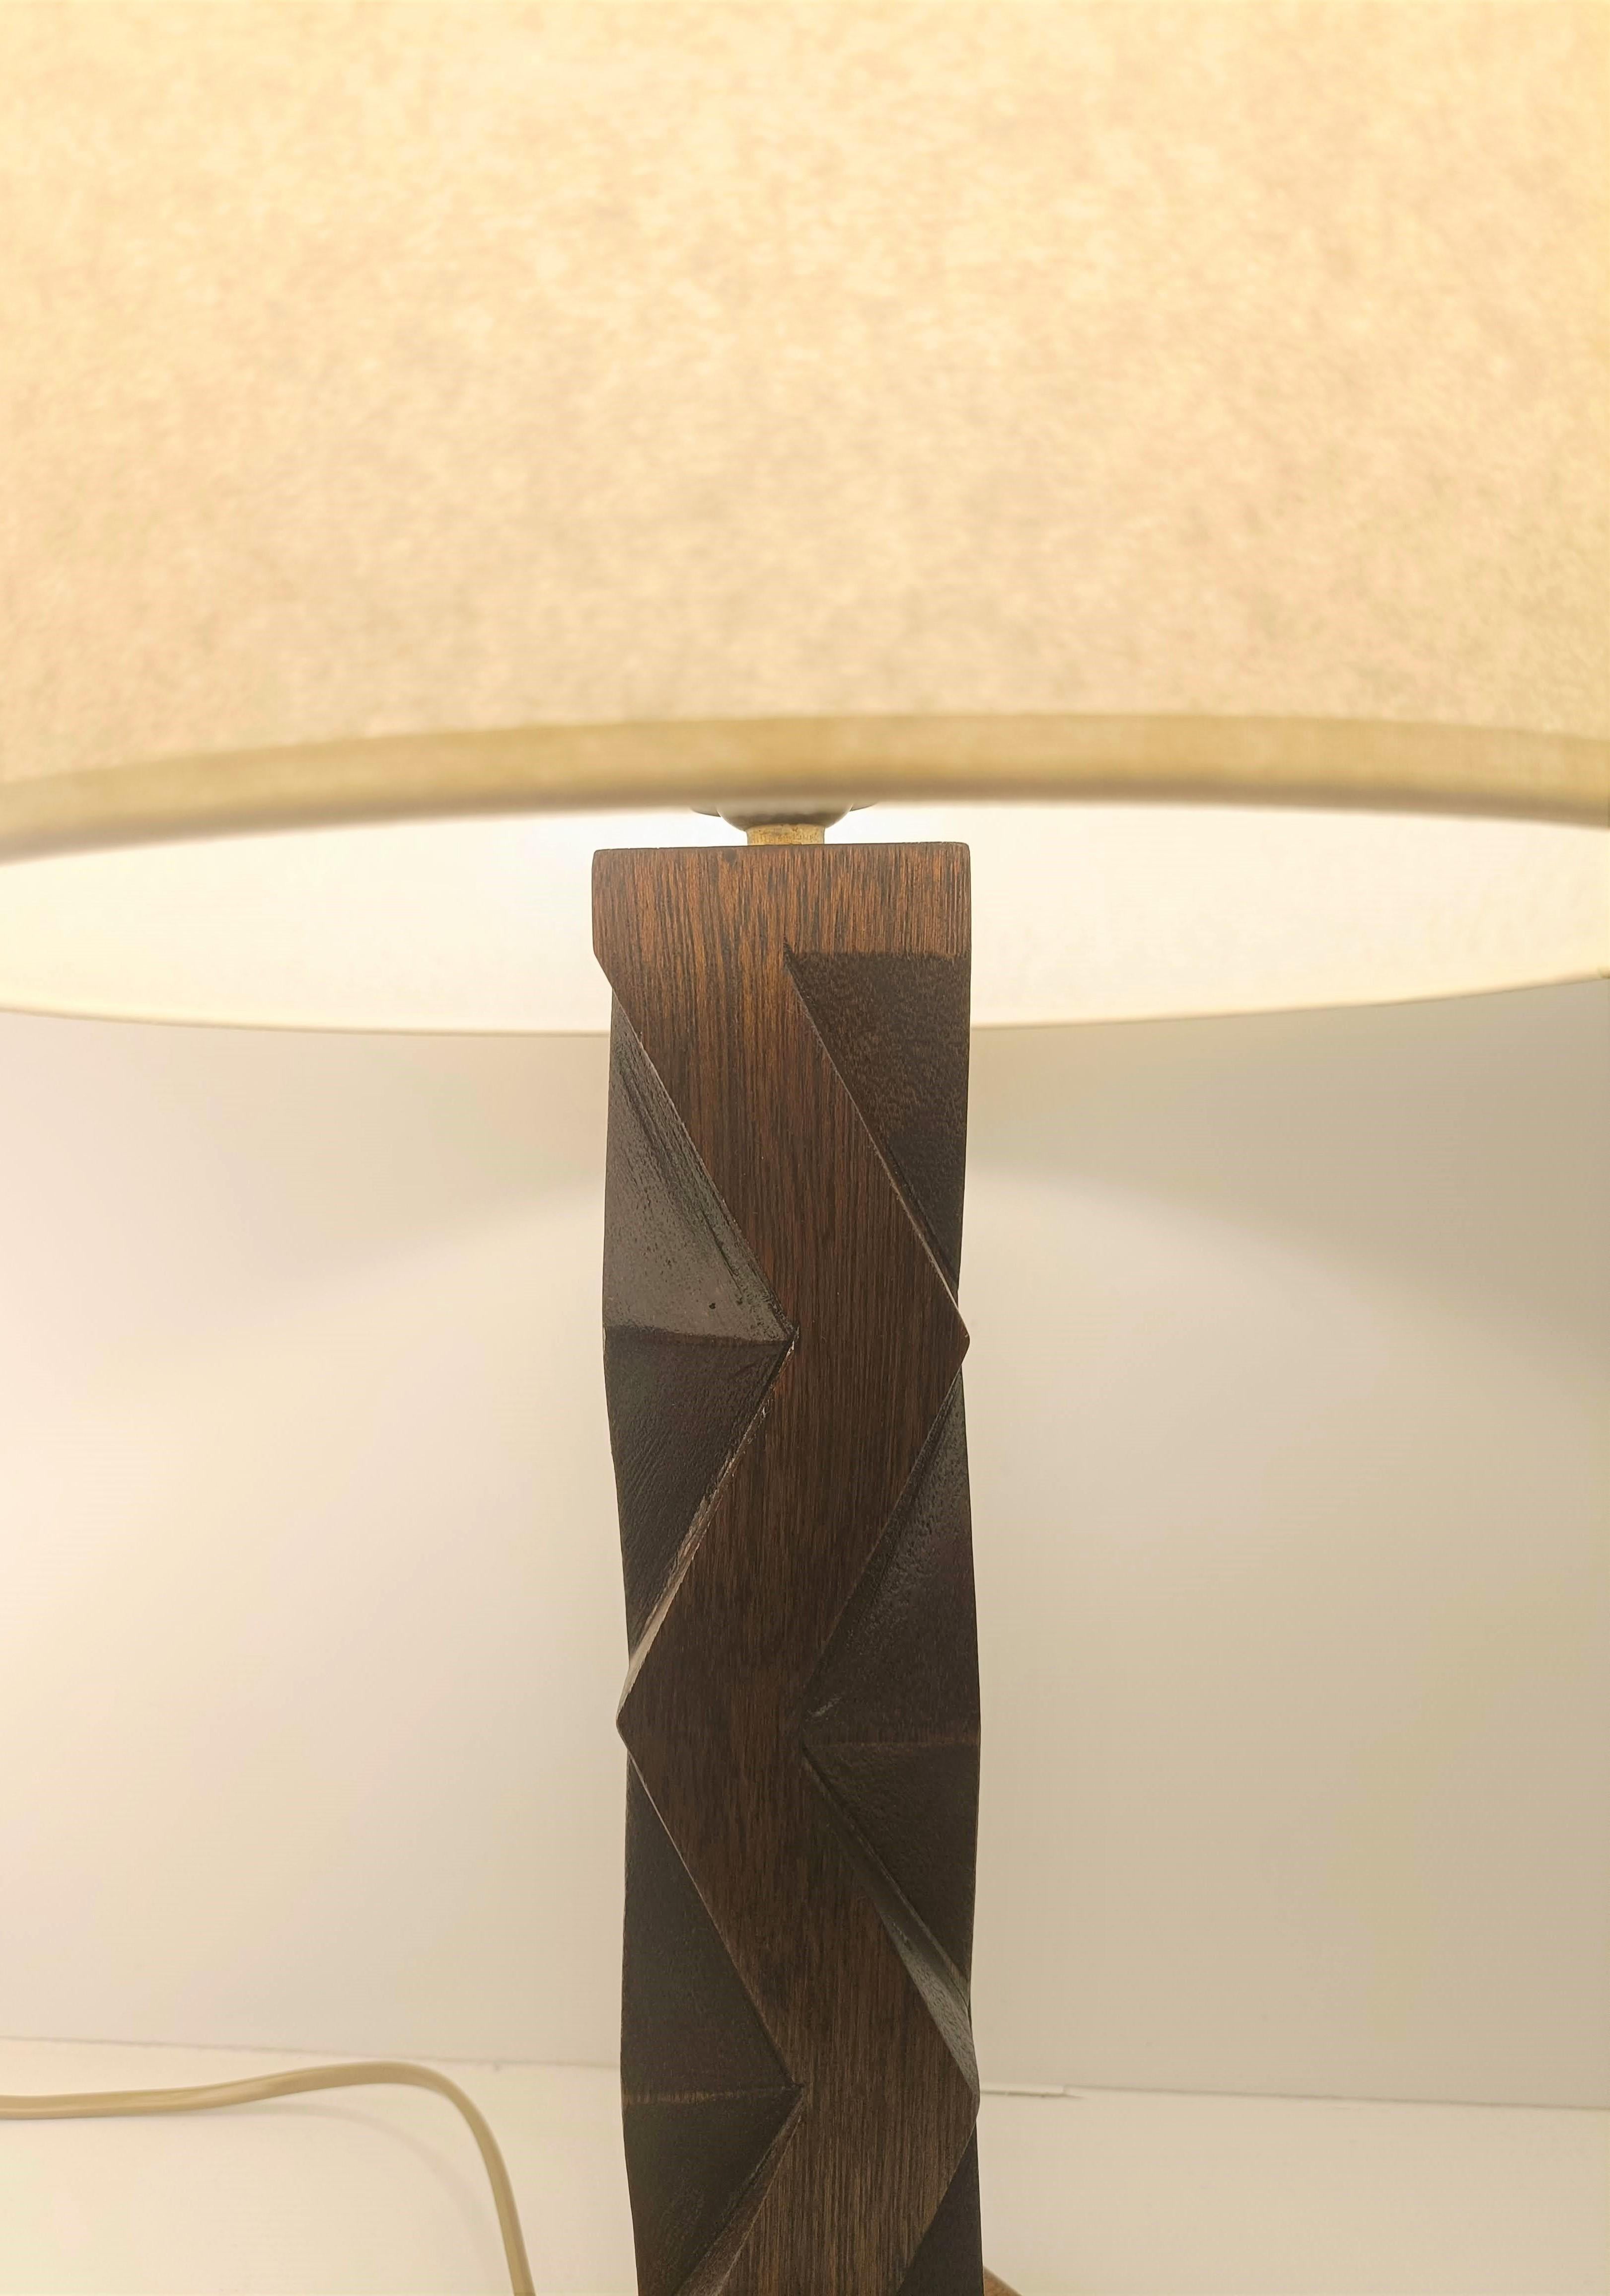 Sculptural Brutalist French Wood Lamp circa 1950 like Constantin Brancusi For Sale 5